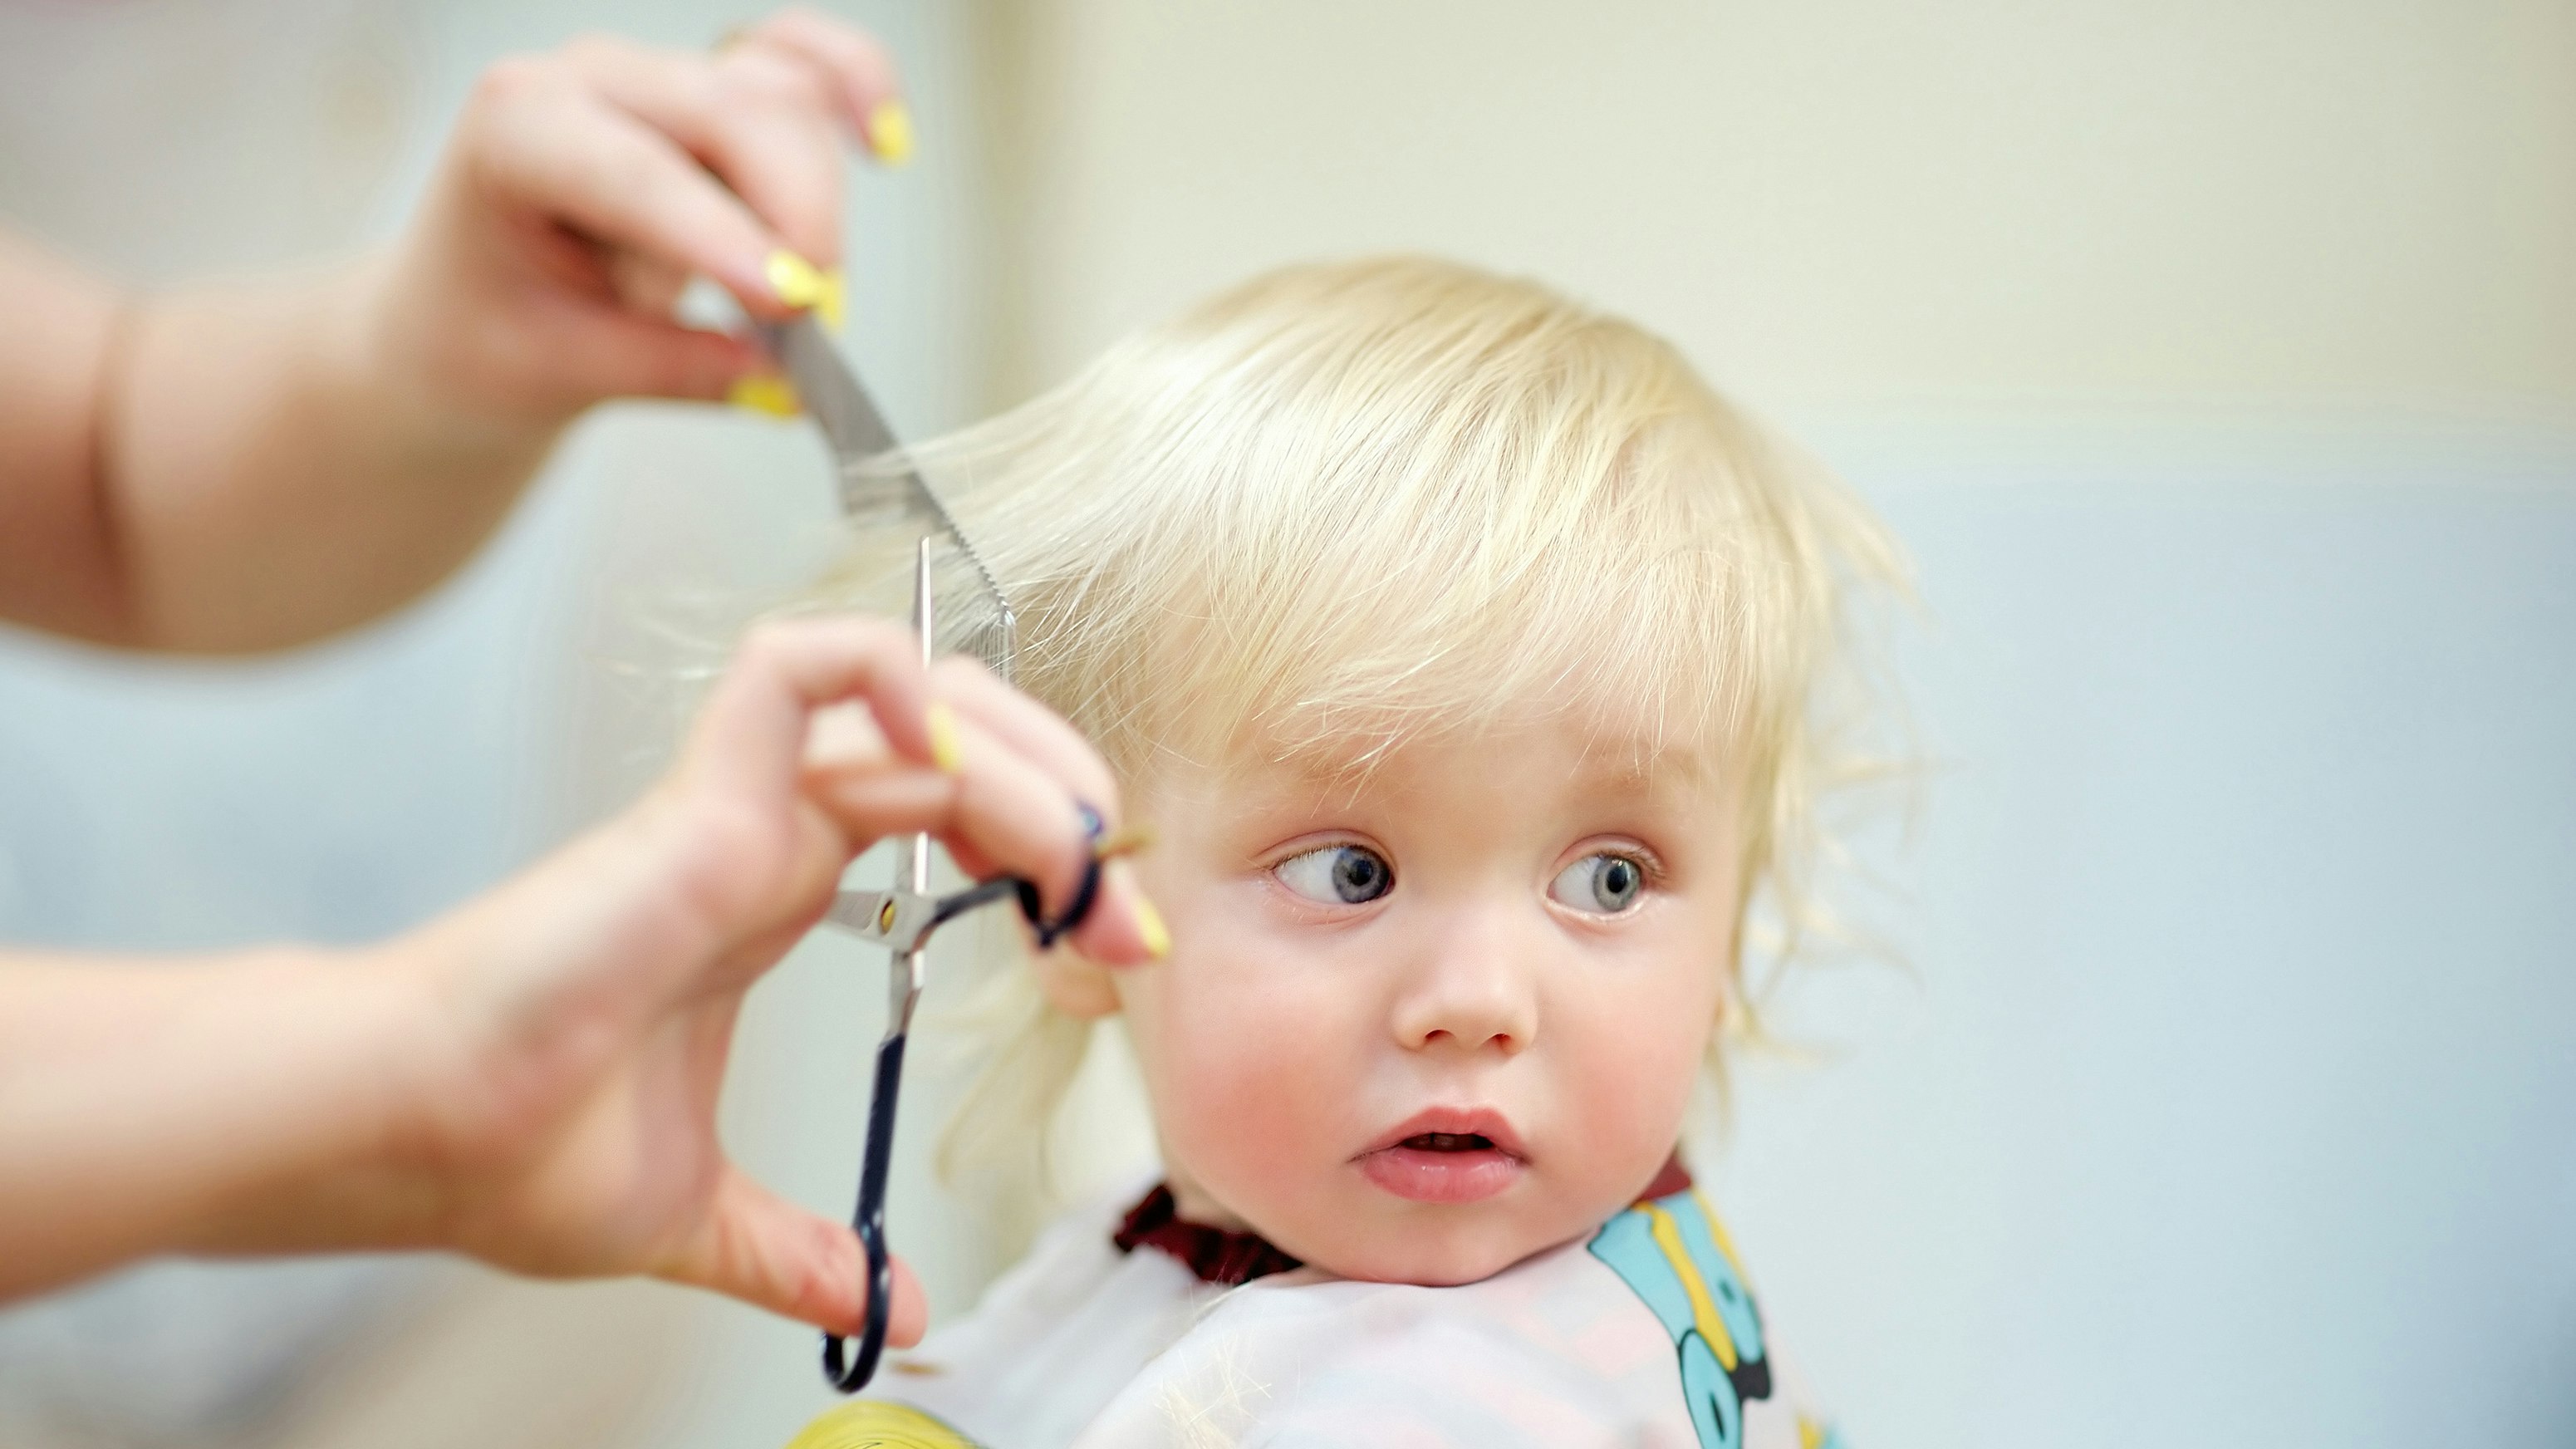 Toddler Haircuts At Home Or The Salon